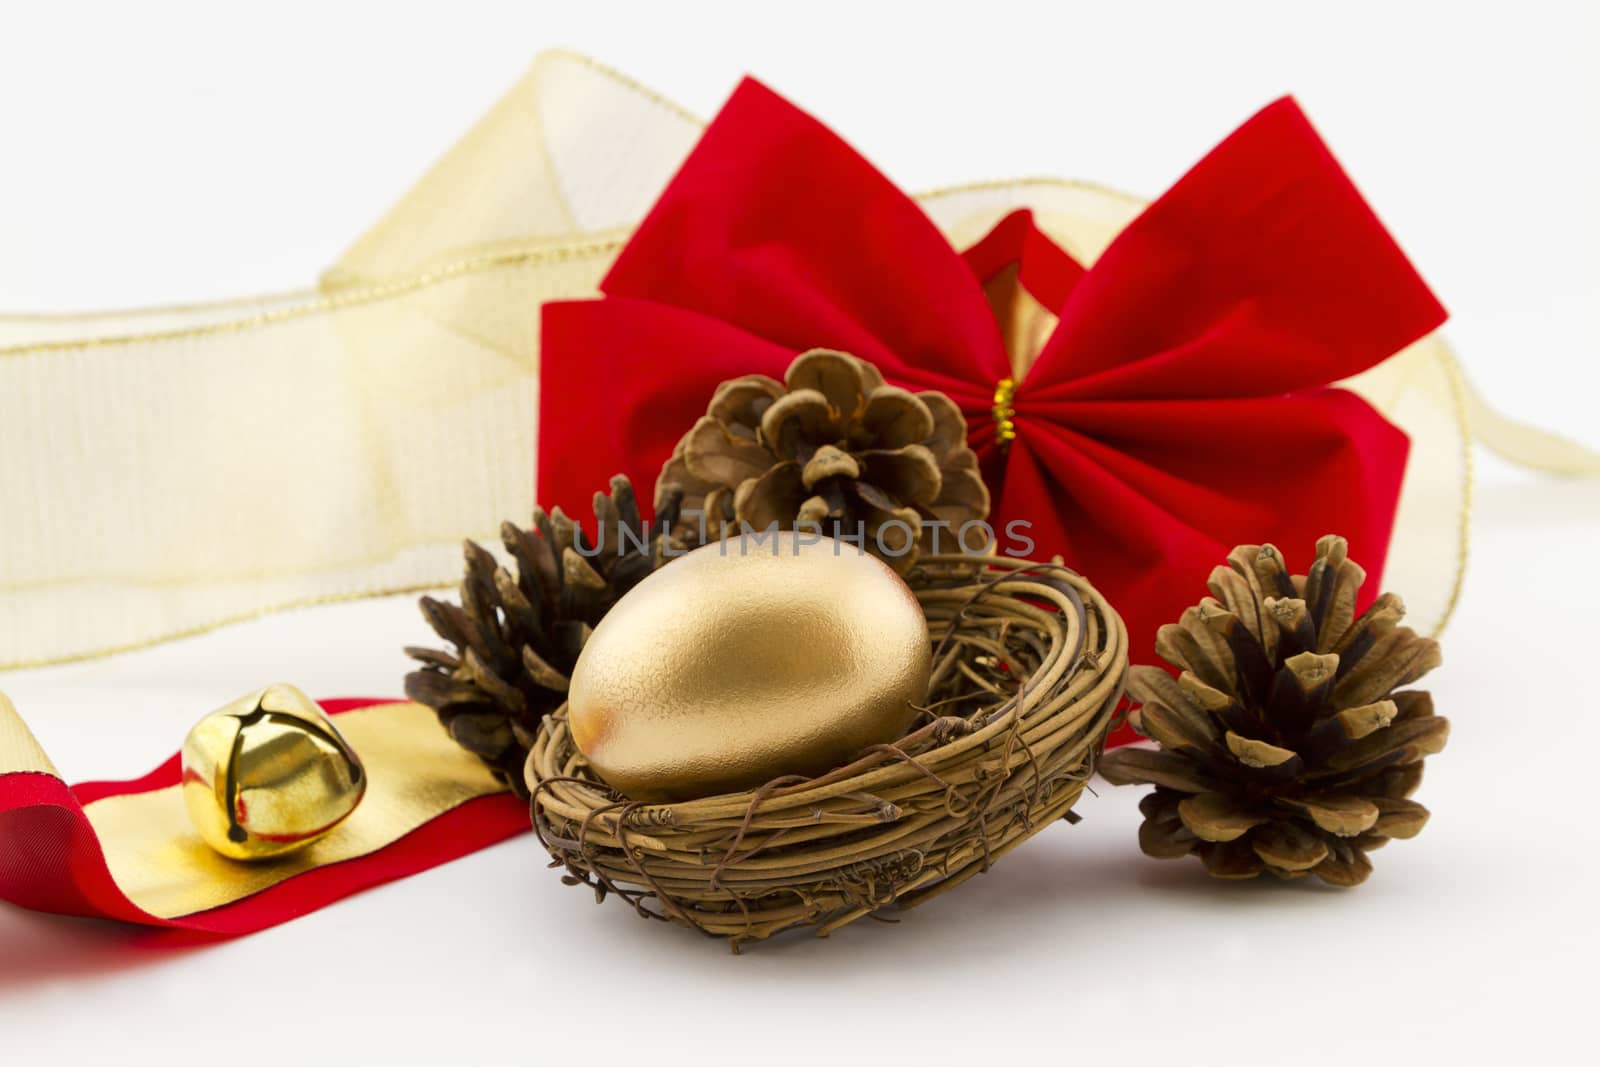 Gold nest egg surrounded by pine cones placed with red velvet bow and gold bell and ribbon.  Holiday financial gift is festive.  